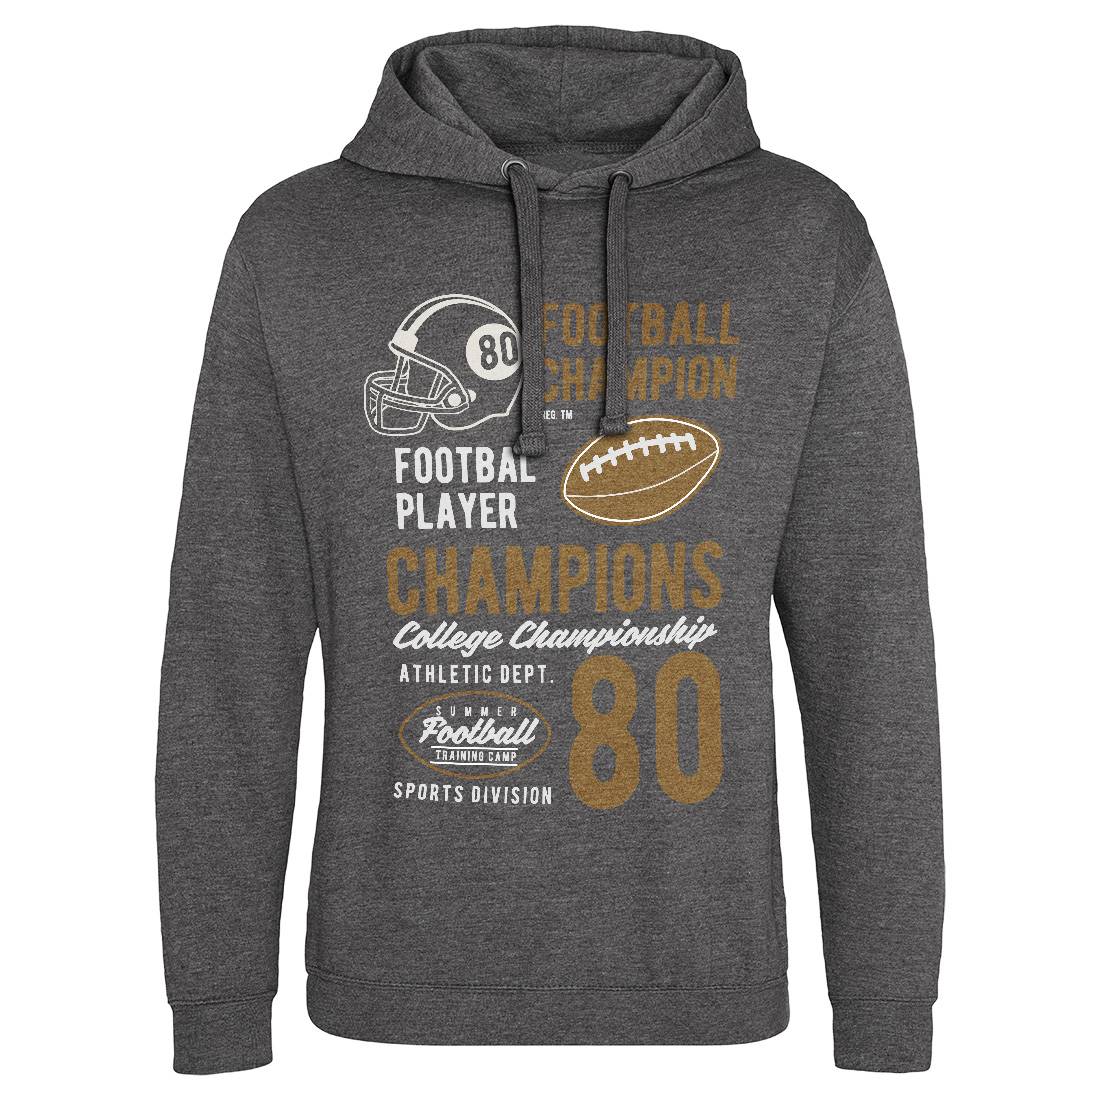 Football Champions Mens Hoodie Without Pocket Sport B405